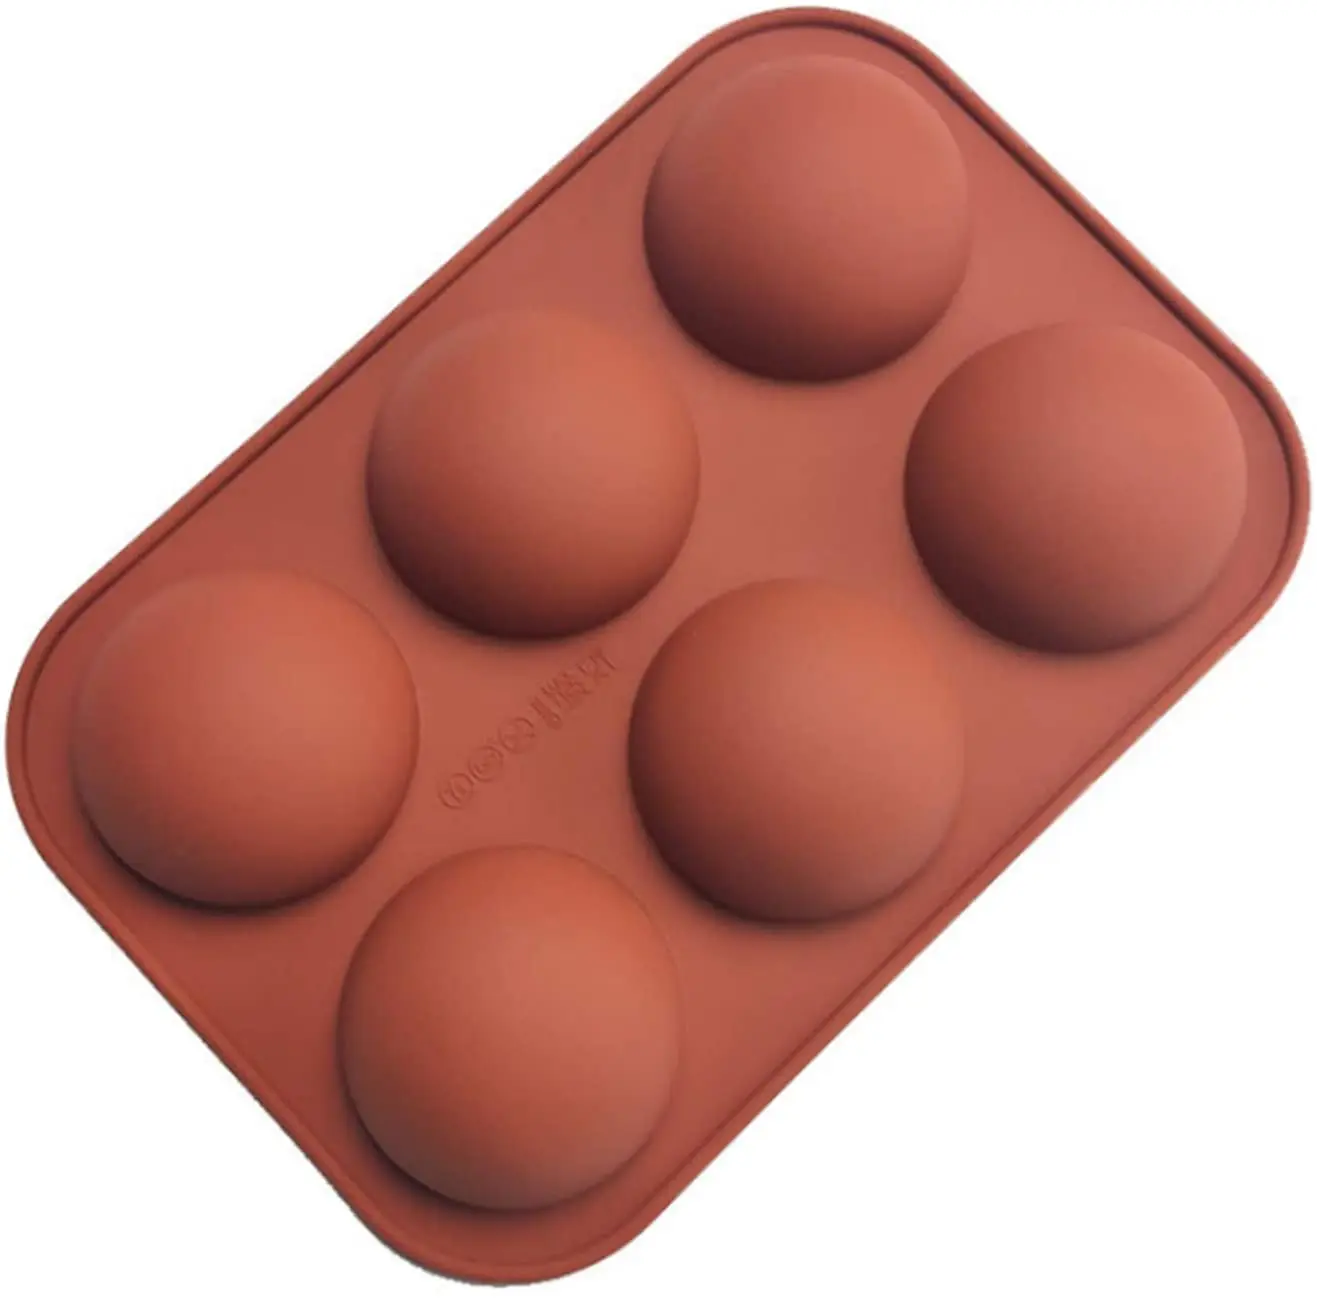 

Large 6 Holes Half Round Semi Sphere Silicone Baking Mold For Making Chocolate, Cake, Jelly, Dome Mousse